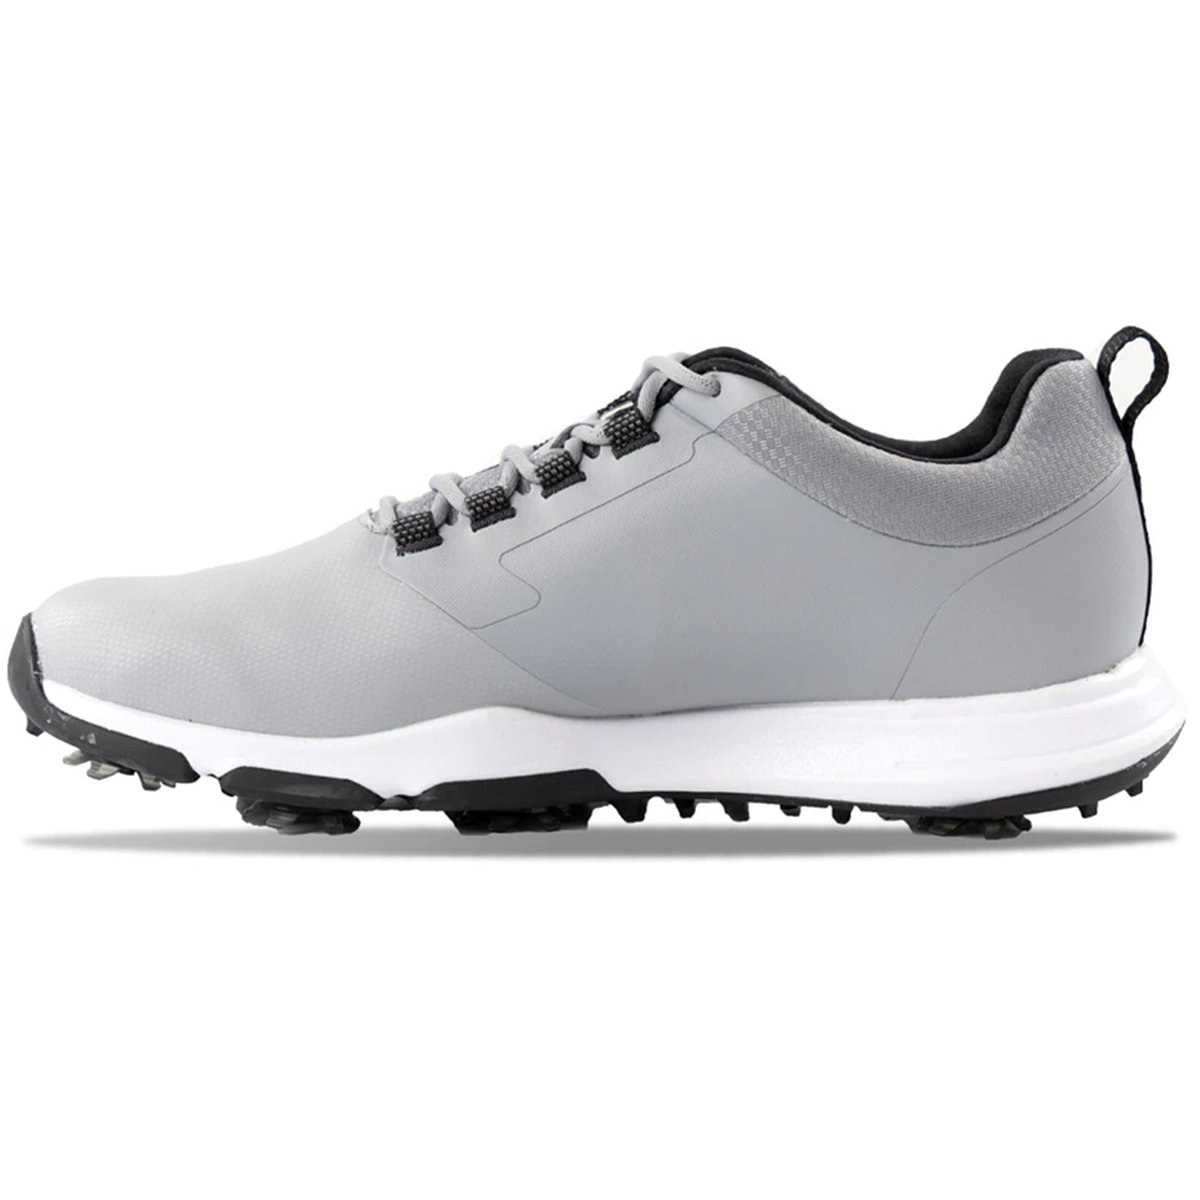 Cuater The Ringer Golf Shoes 4MR215 Light Grey | Function18 | Restrictedgs